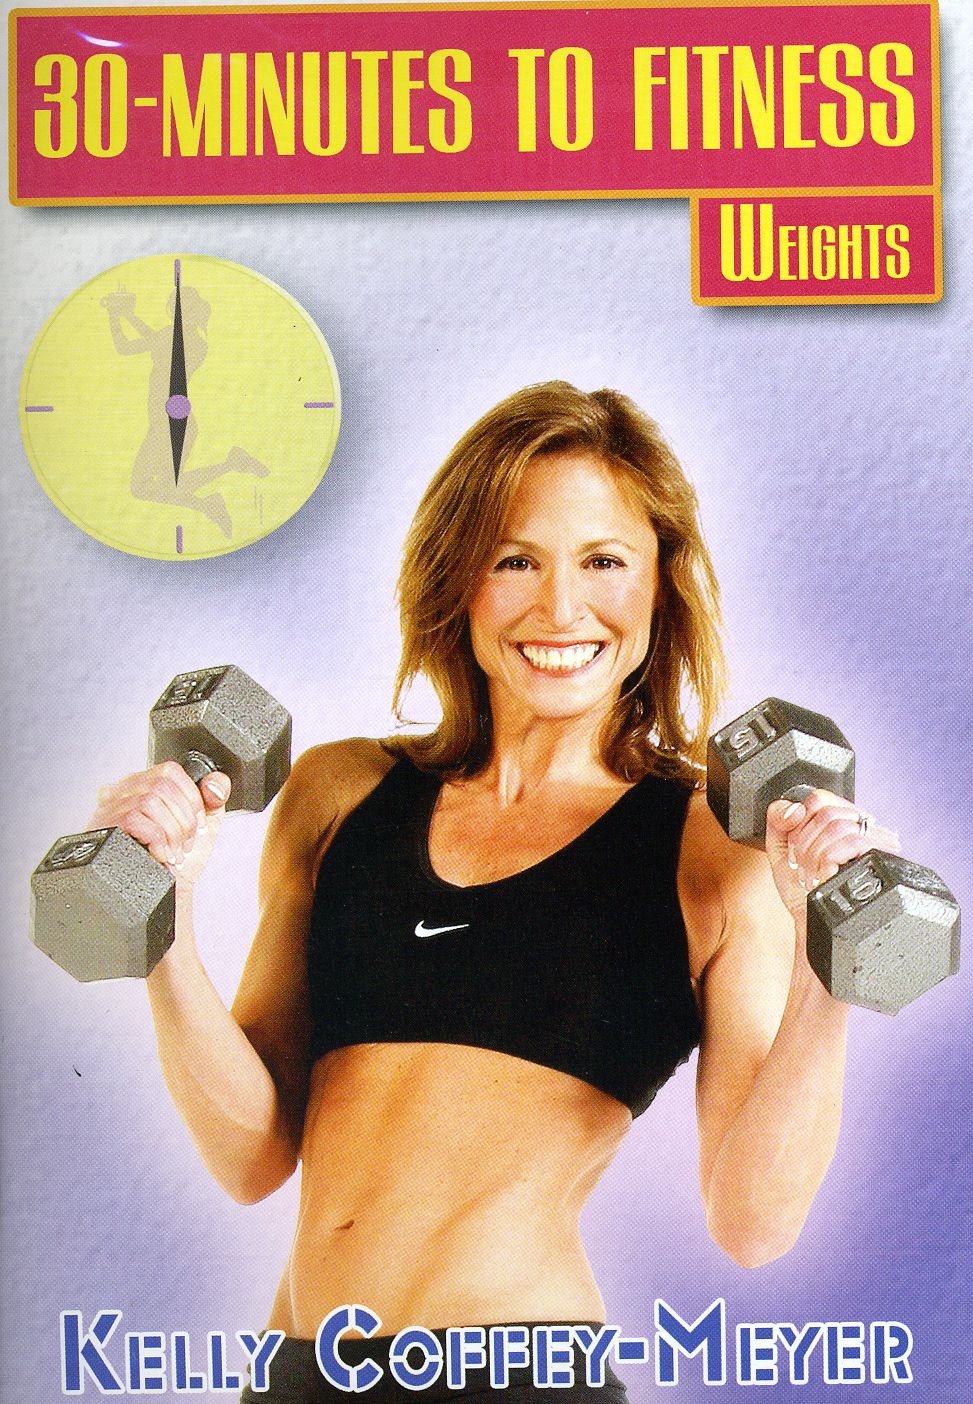 30 MINUTES TO FITNESS: WEIGHTS WORKOUT